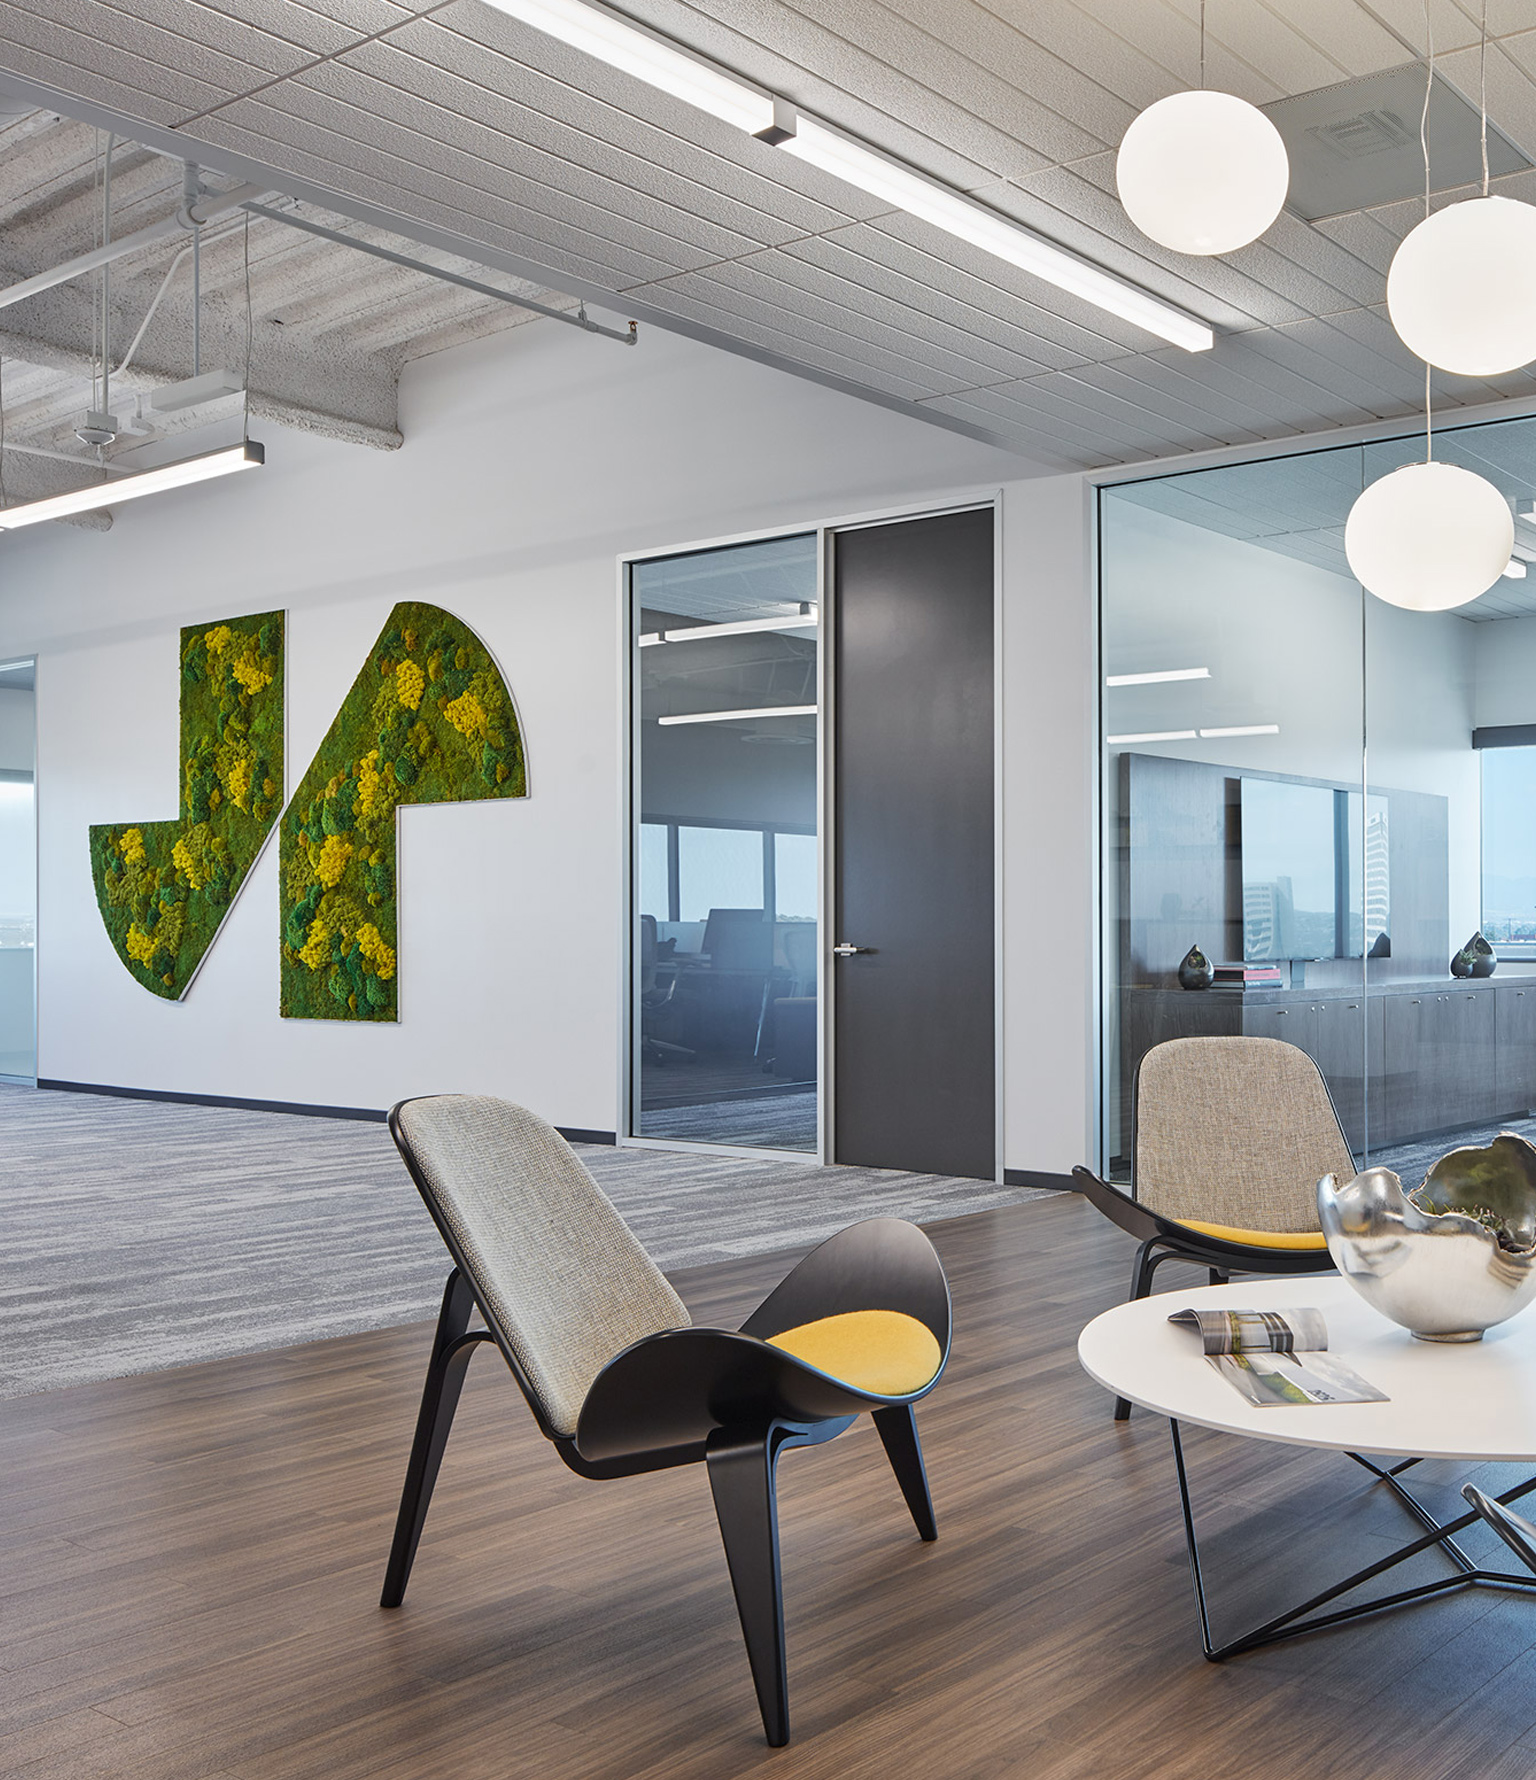 JR Group offices with moss logo on wall